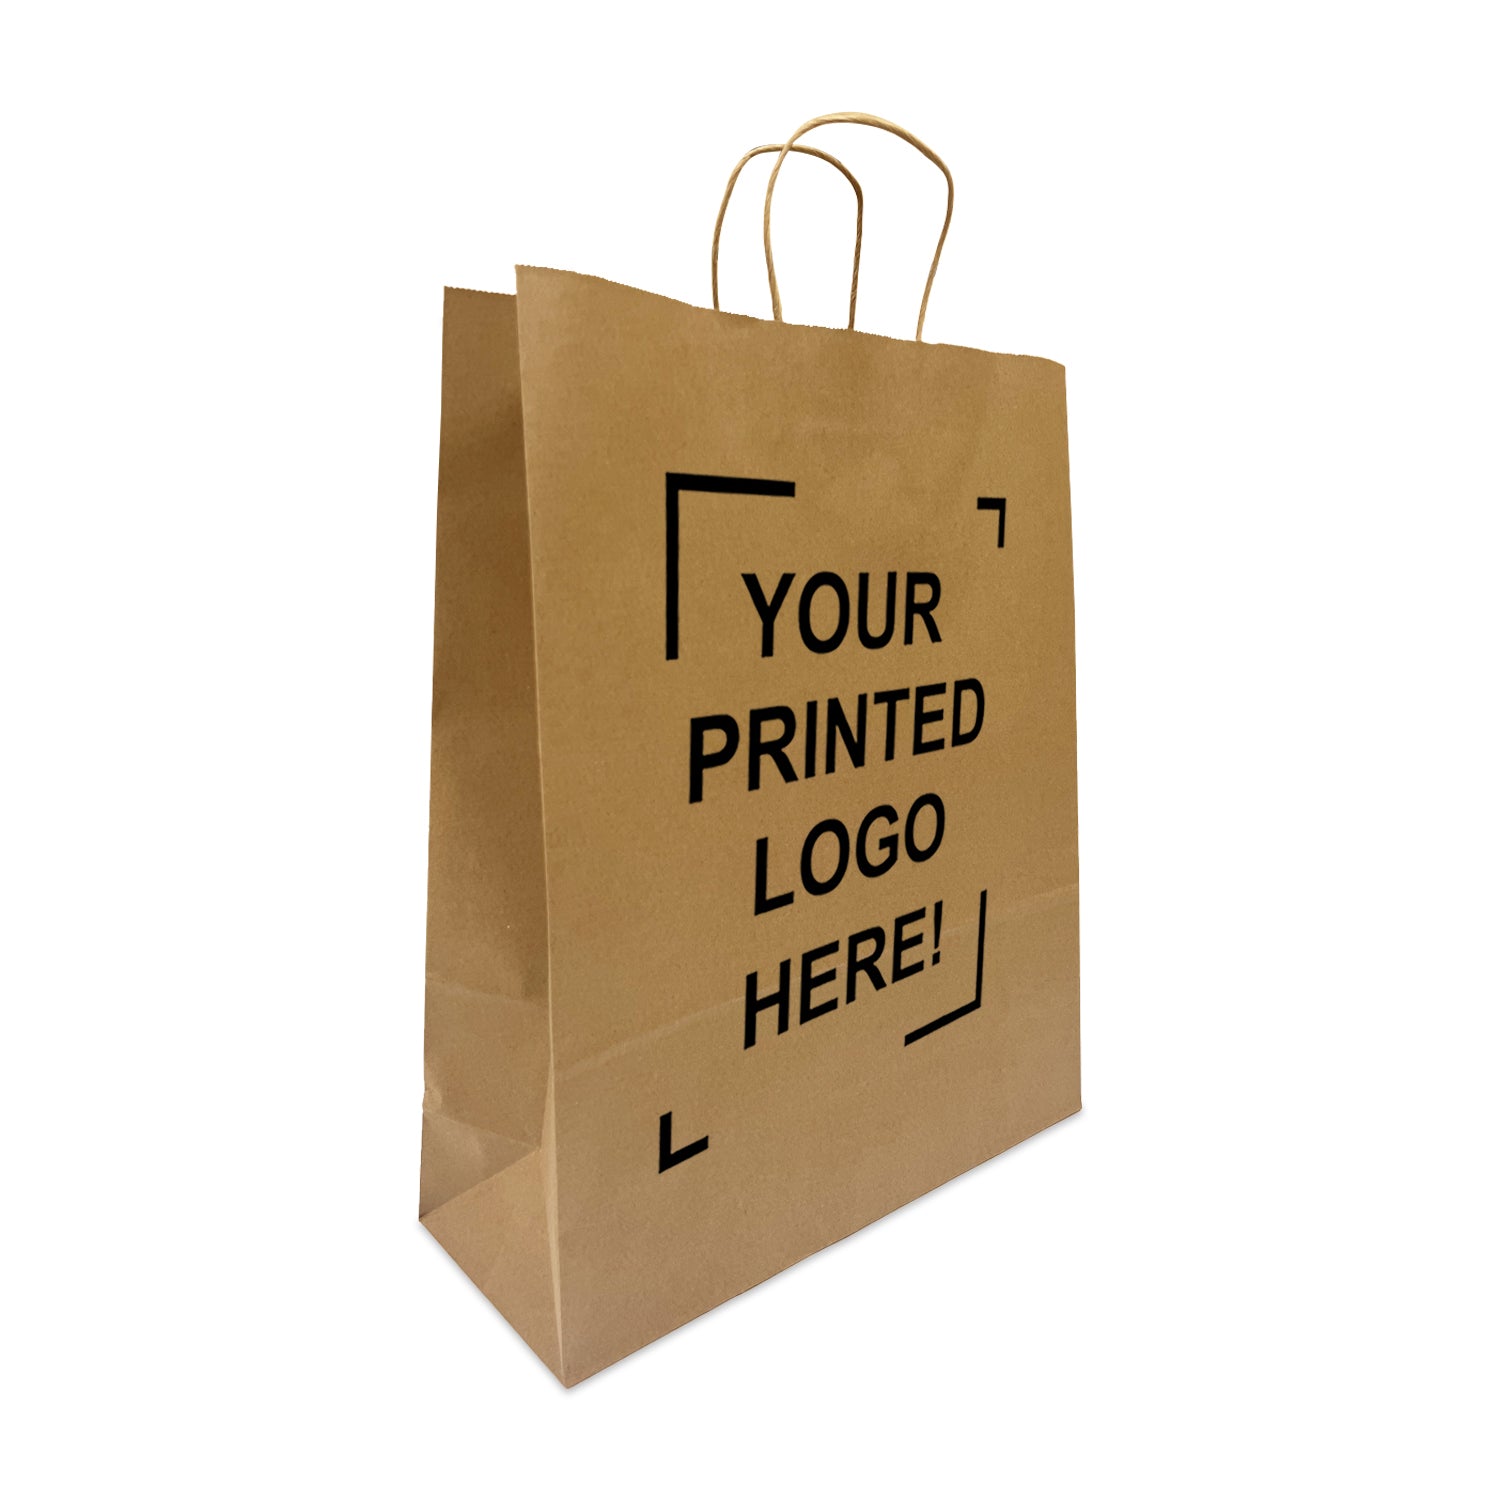 200 Pcs, Queen, 16x6x19.25 inches, Kraft Paper Bags, with Twisted Handle, Full Color Custom Print